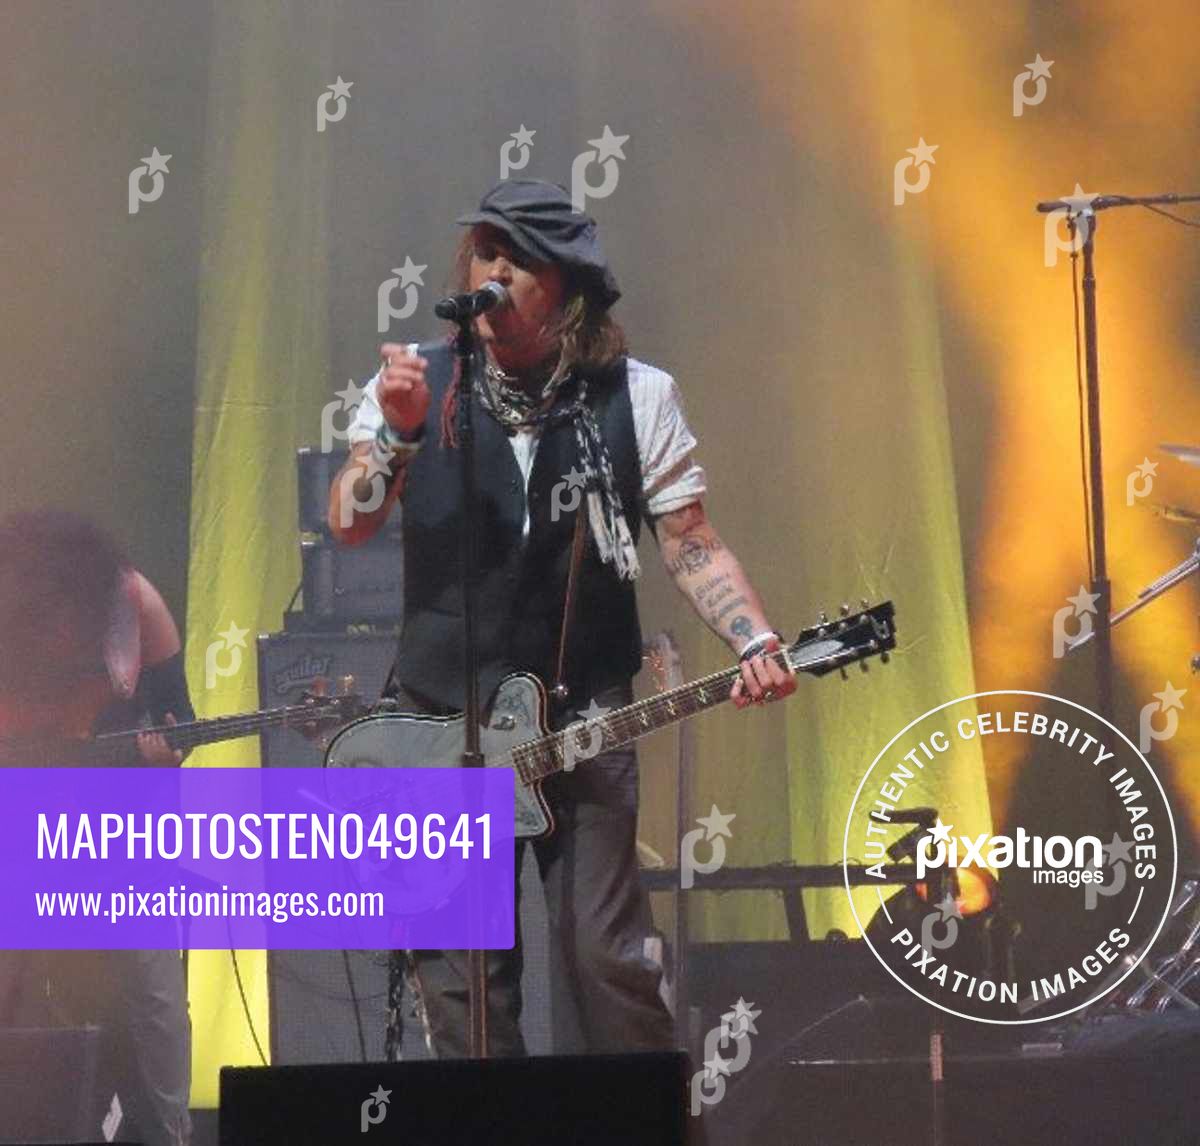 Johnny Depp playing live with Jeff Beck in Paris